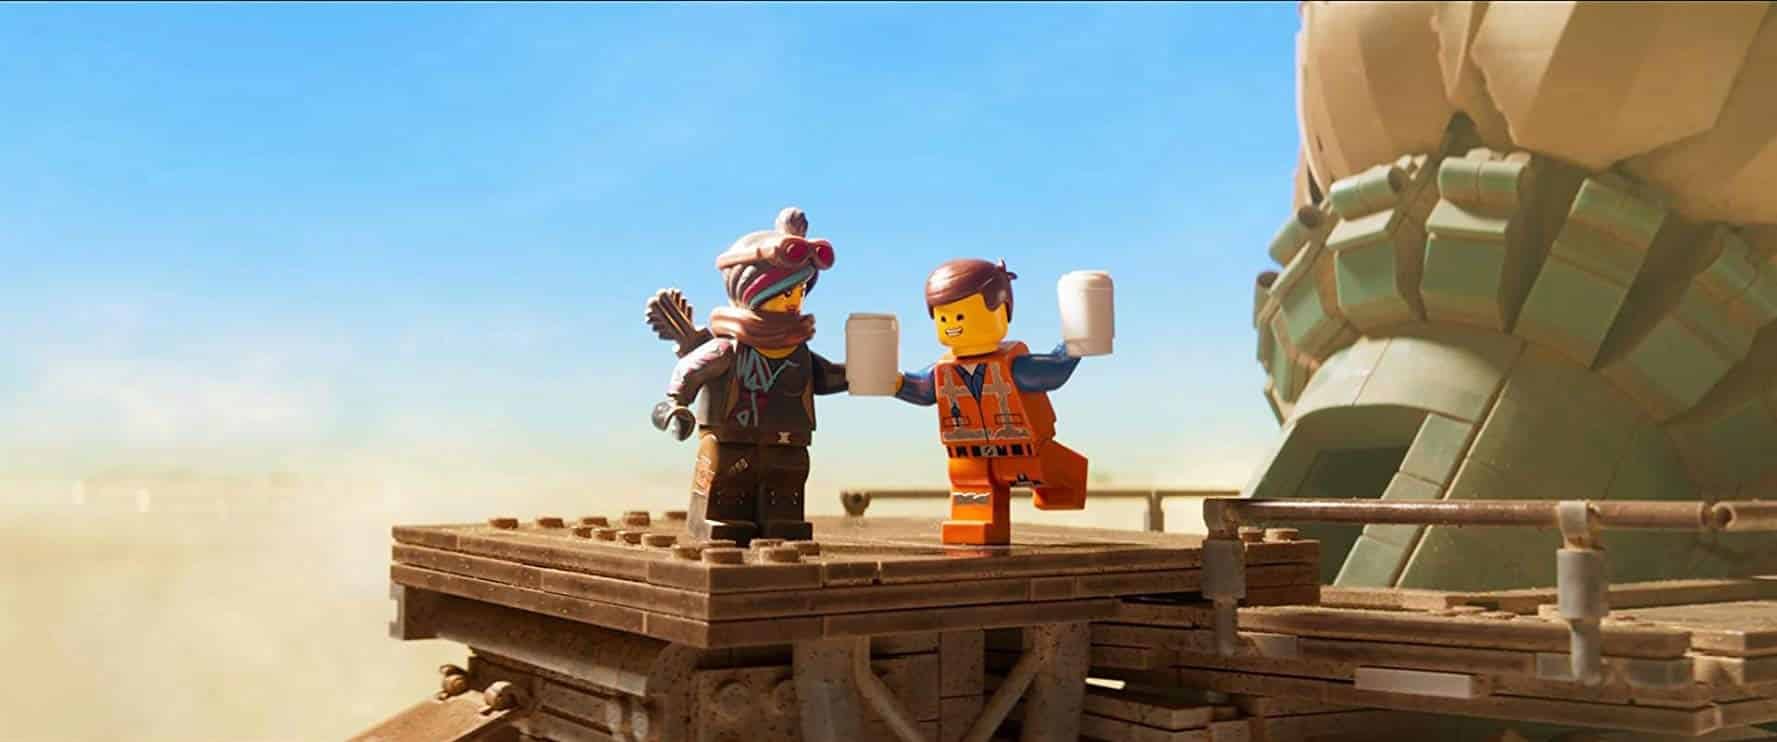 Warner Bros. Addresses The LEGO Movie 2 Underperforming and Future Reboots